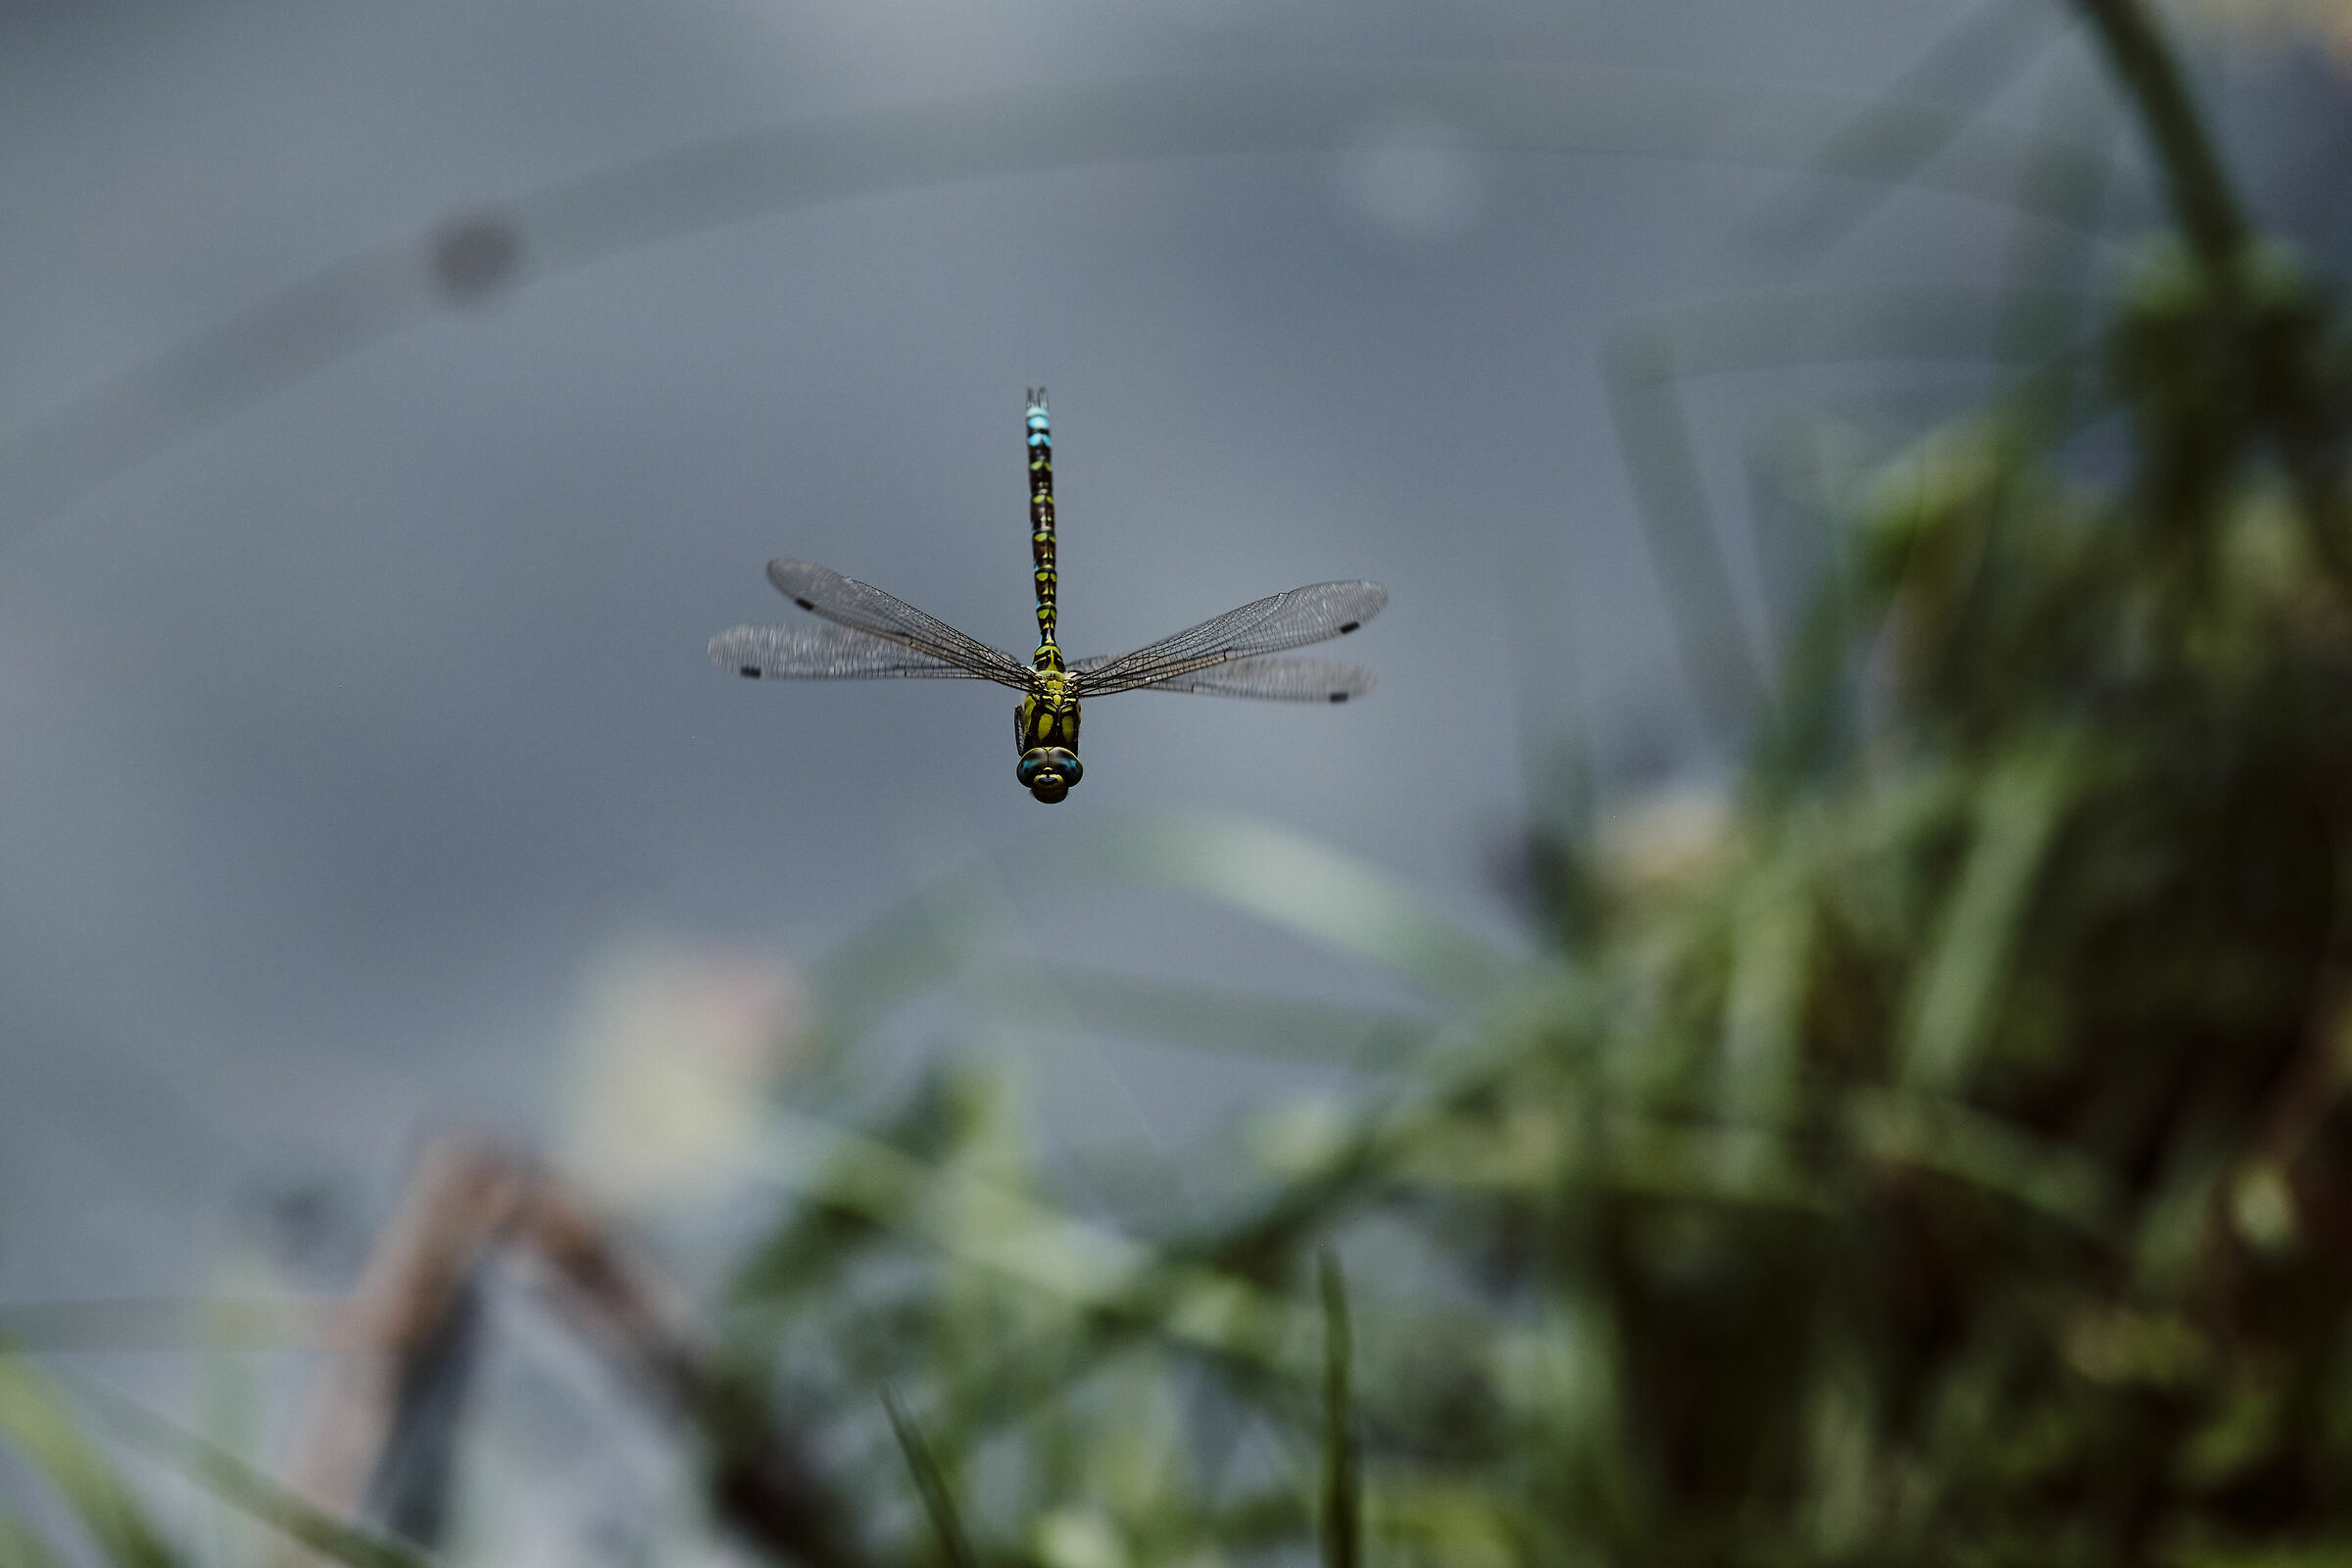 Friendly and curious dragonfly...